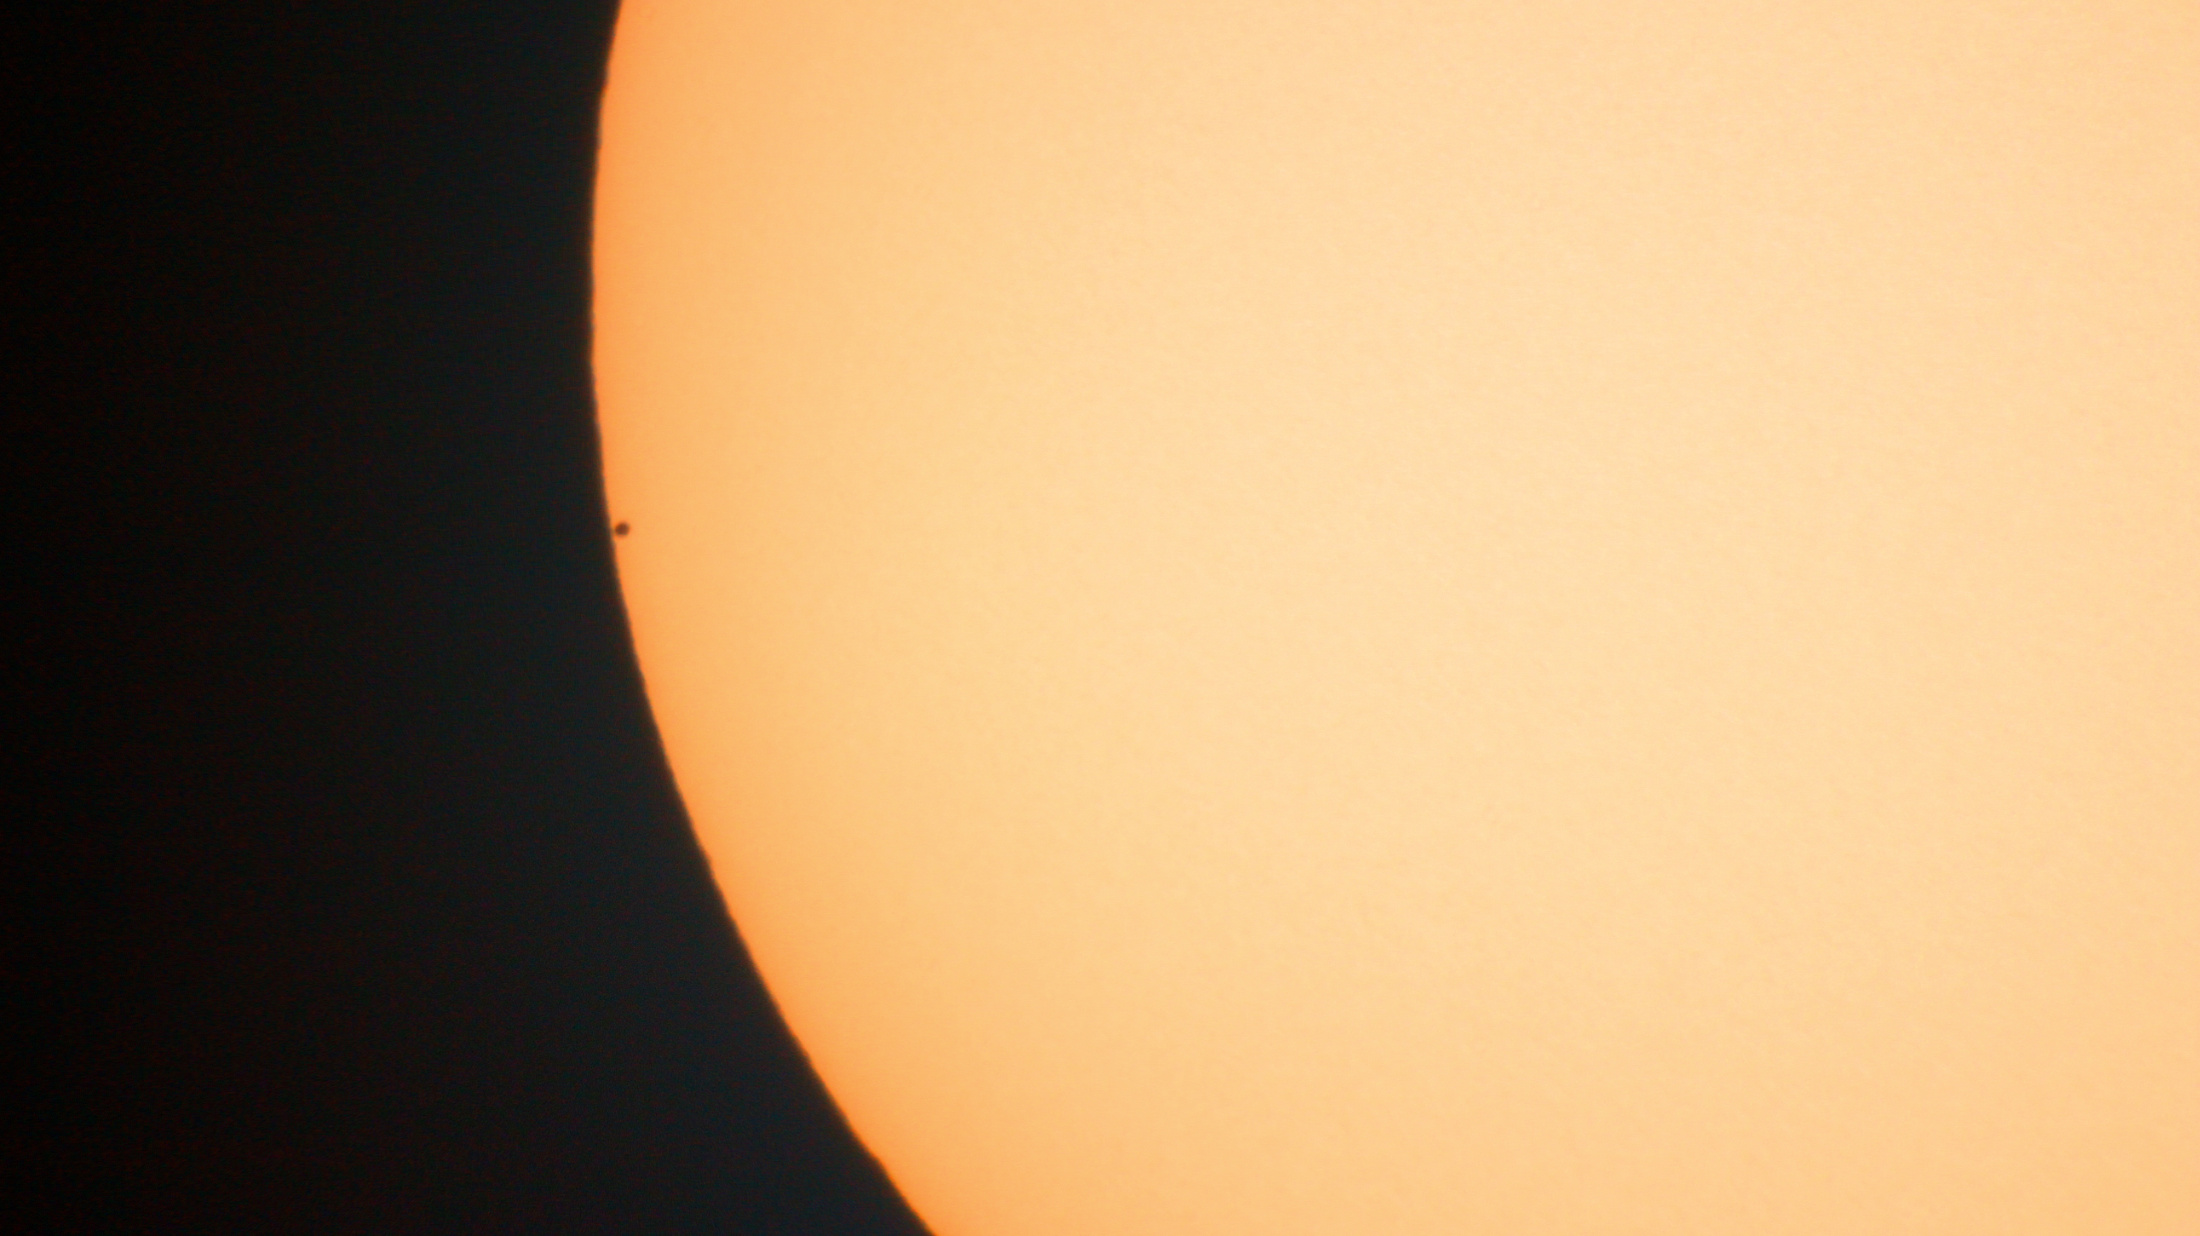 Mercury transit in front of the sun